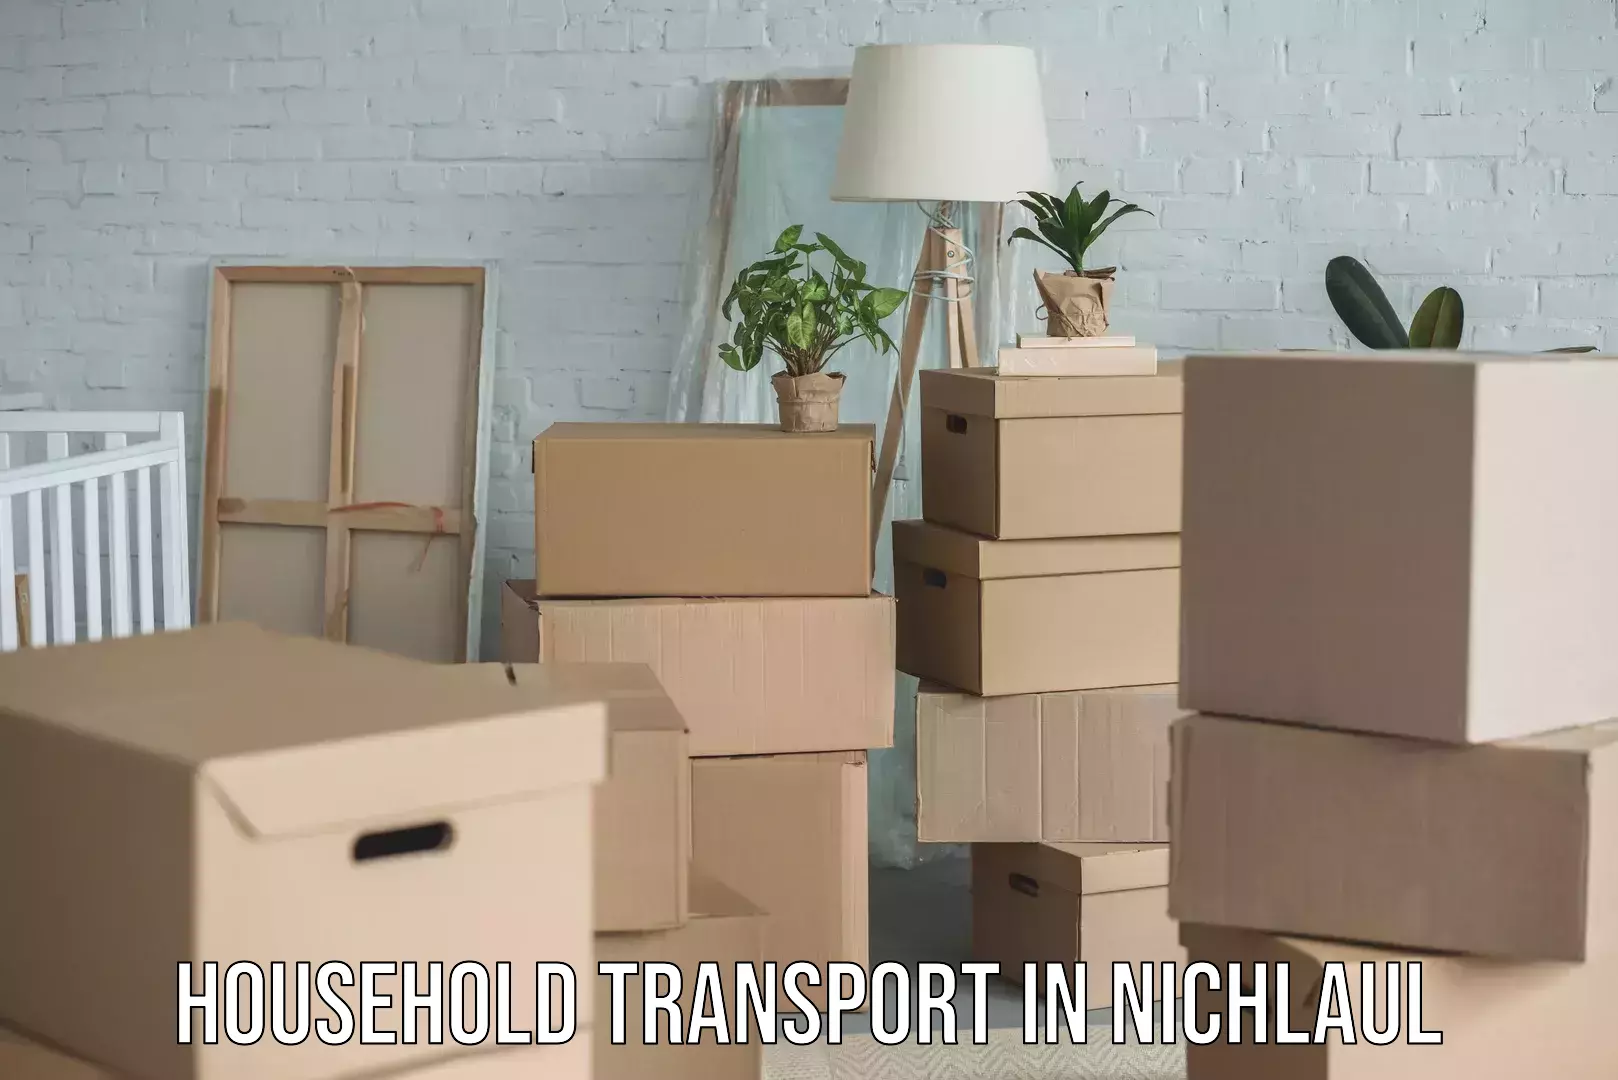 Household transport experts in Nichlaul